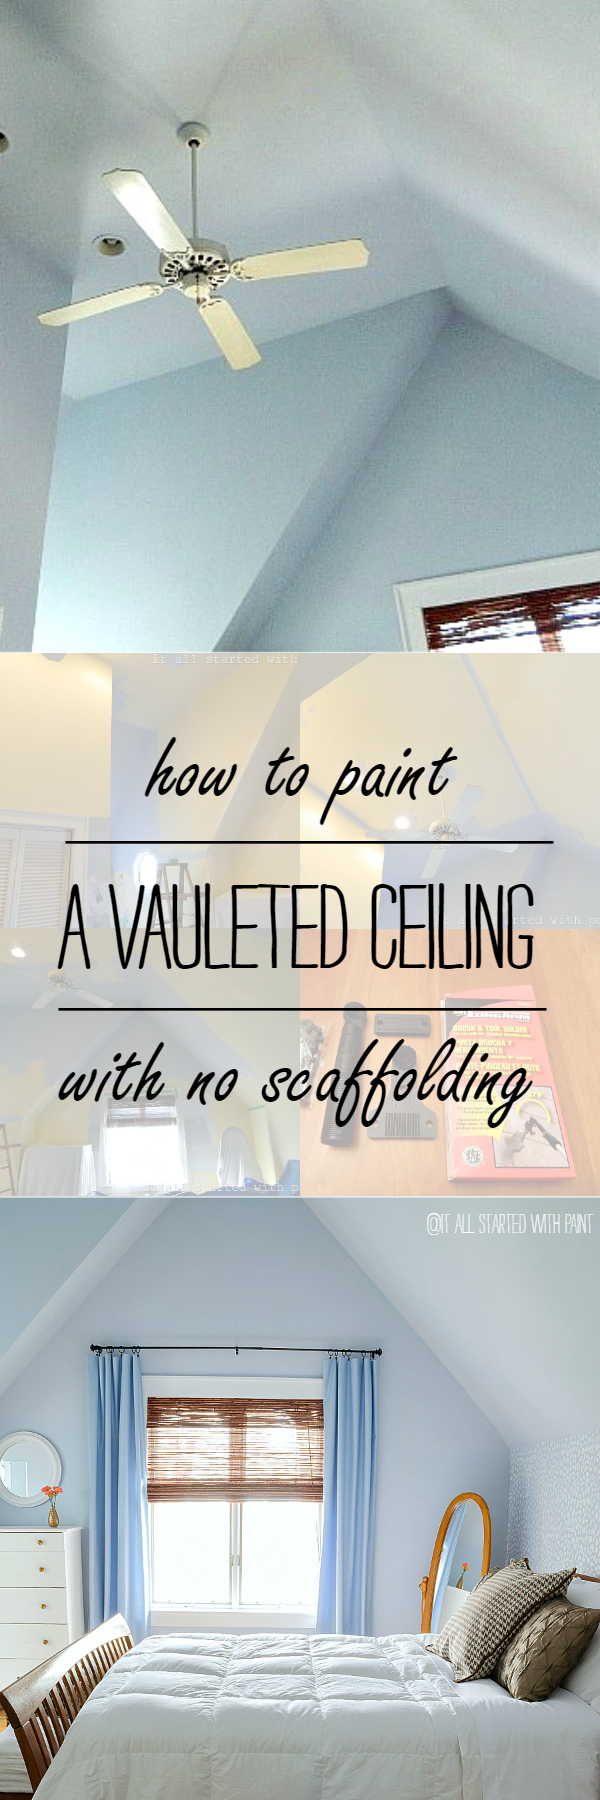 How To Paint A Vaulted Ceiling Without Scaffolding